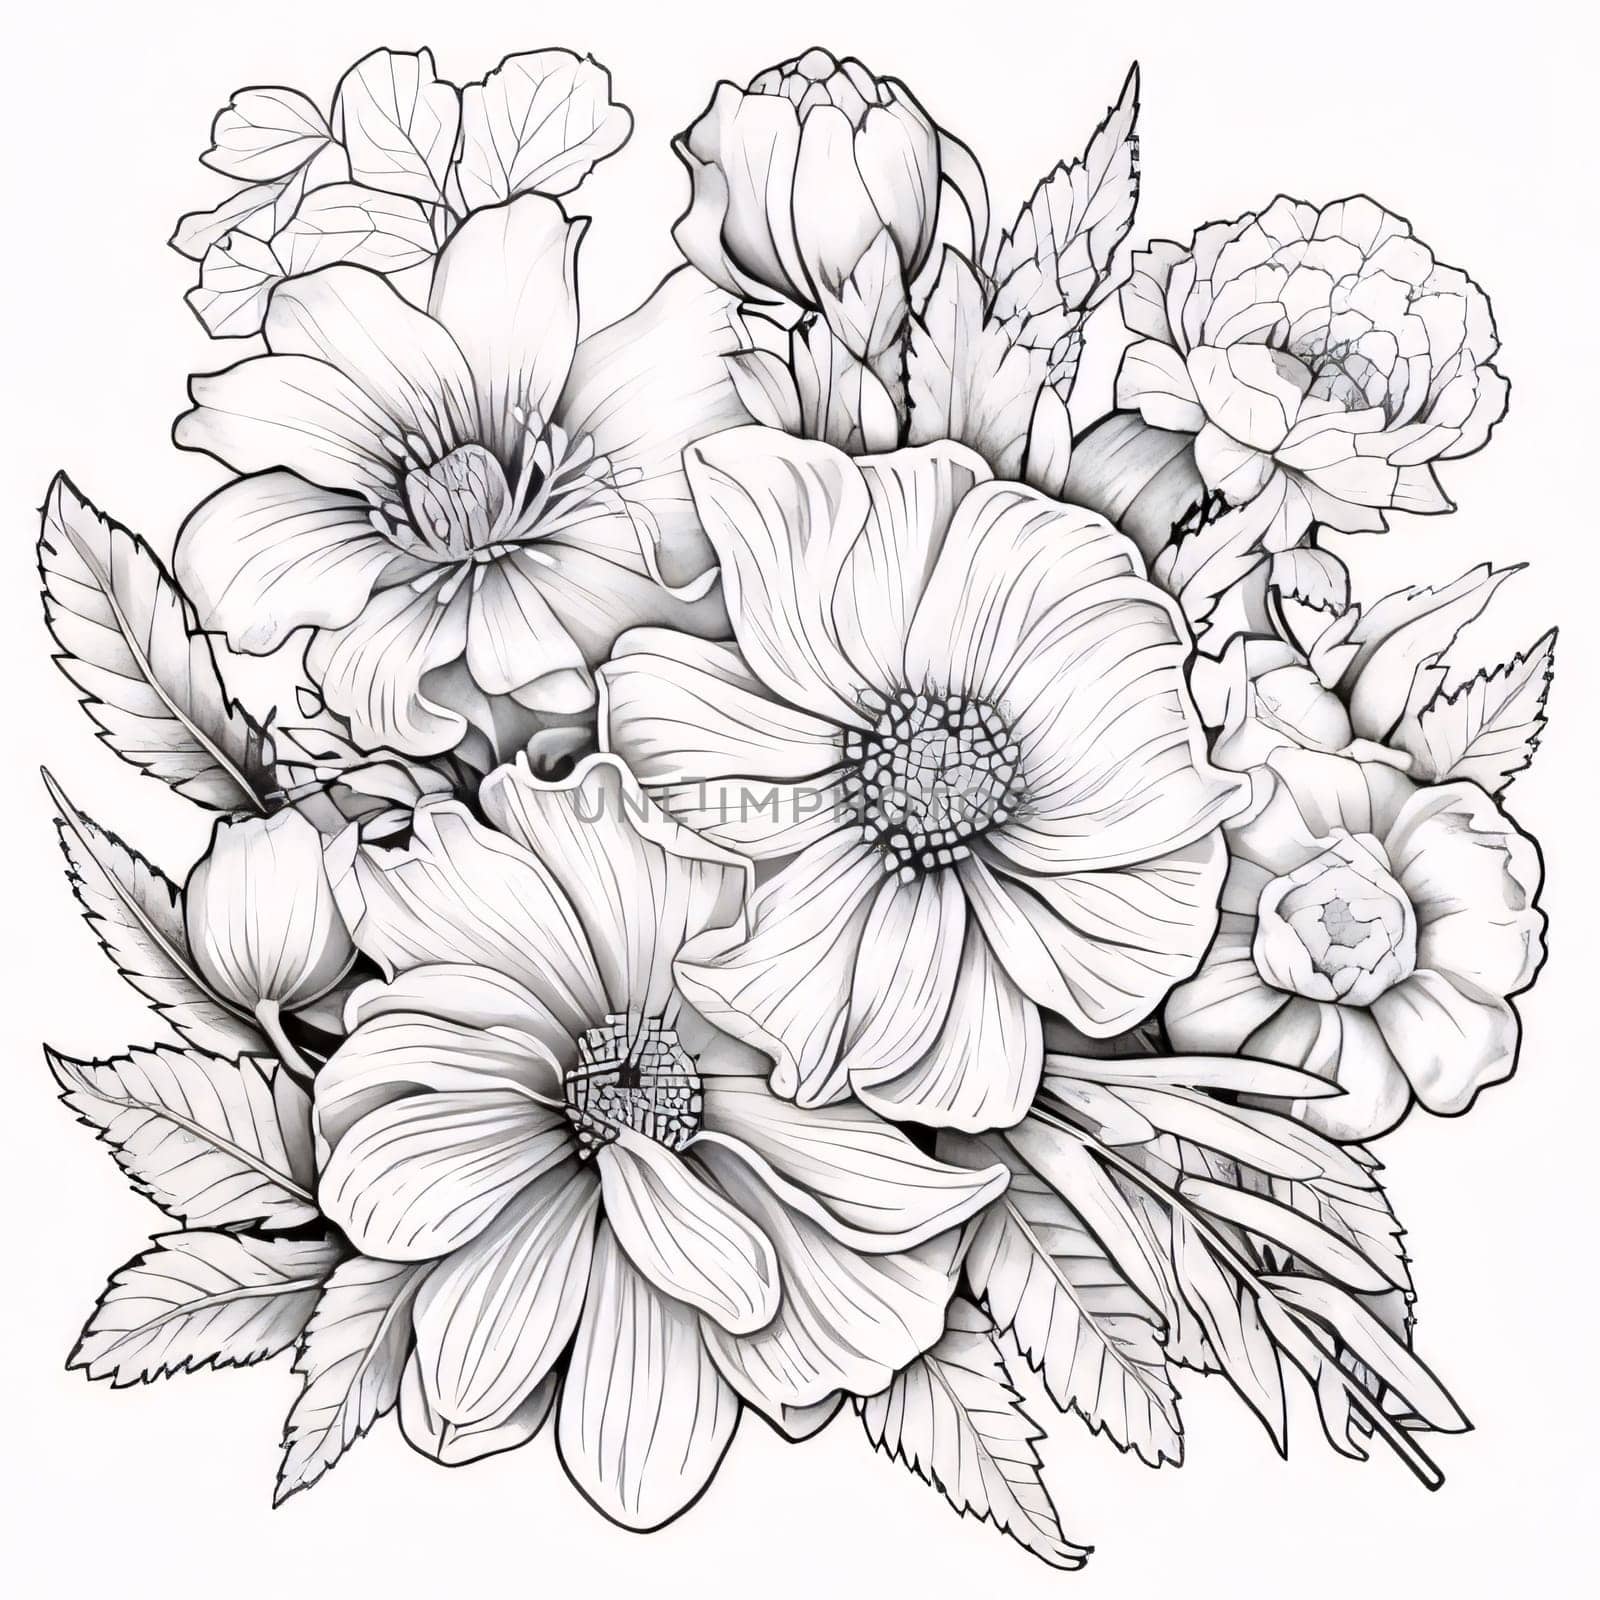 Black and white coloring sheet bouquet of flowers. Flowering flowers, a symbol of spring, new life. A joyful time of nature awakening to life.